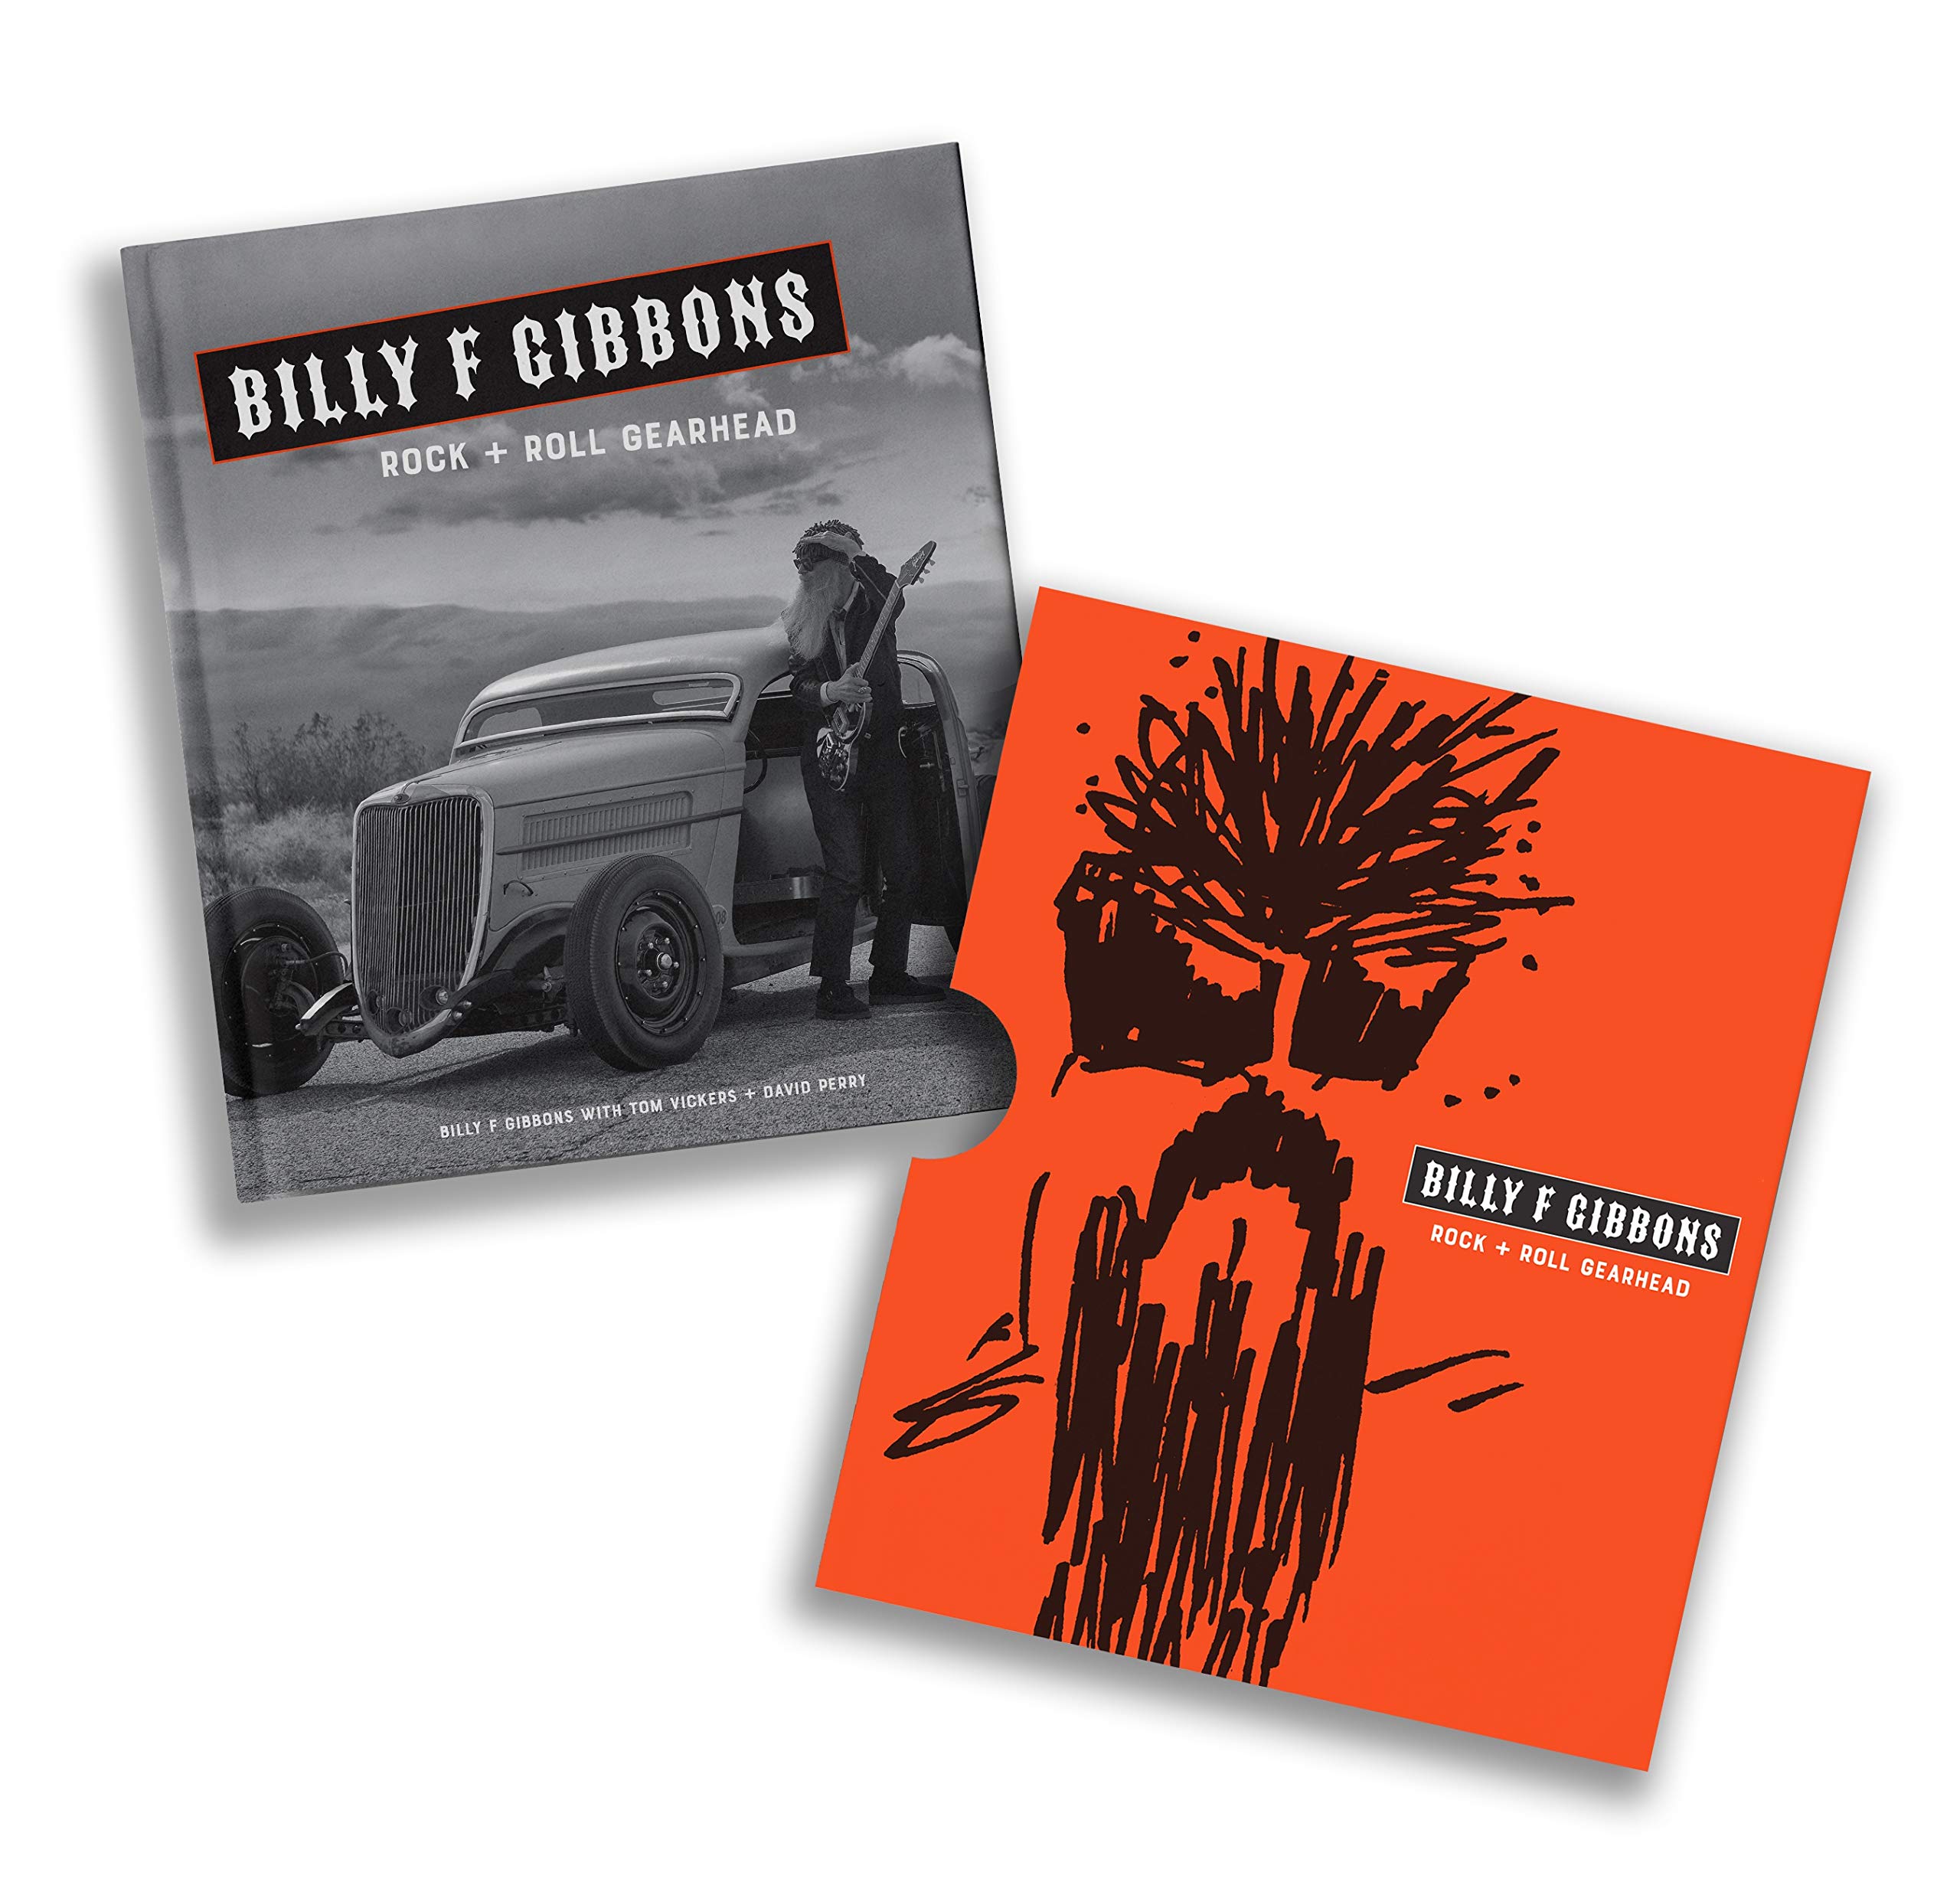 Billy F Gibbons | Billy F Gibbons, Tom Vickers